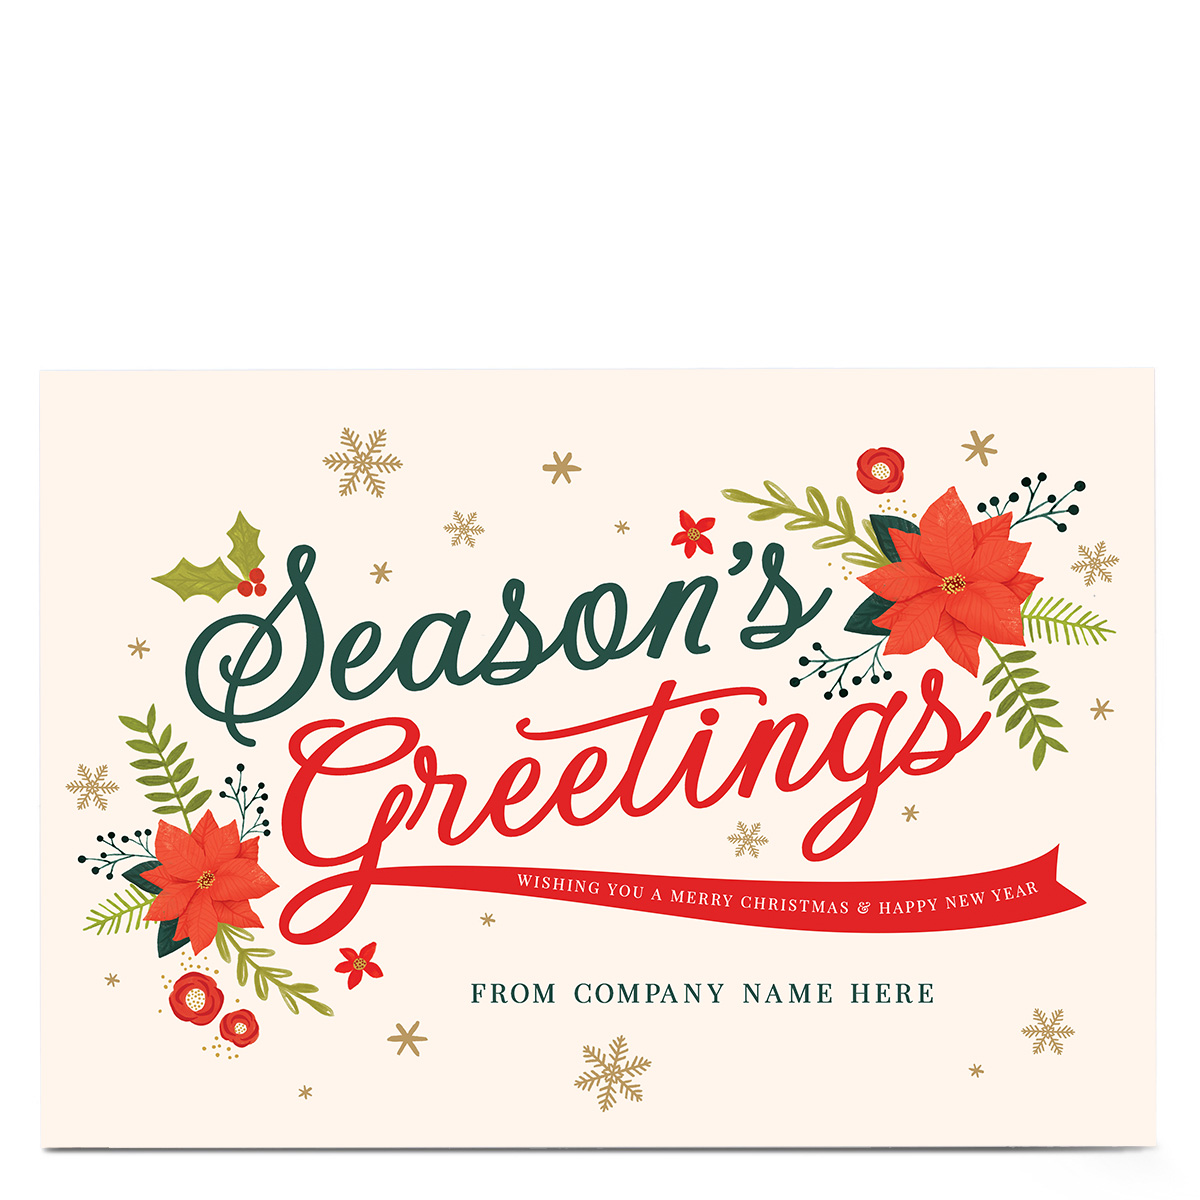 Buy Personalised Christmas Card Season's Greetings From Your Company for GBP 1.794.99 Card